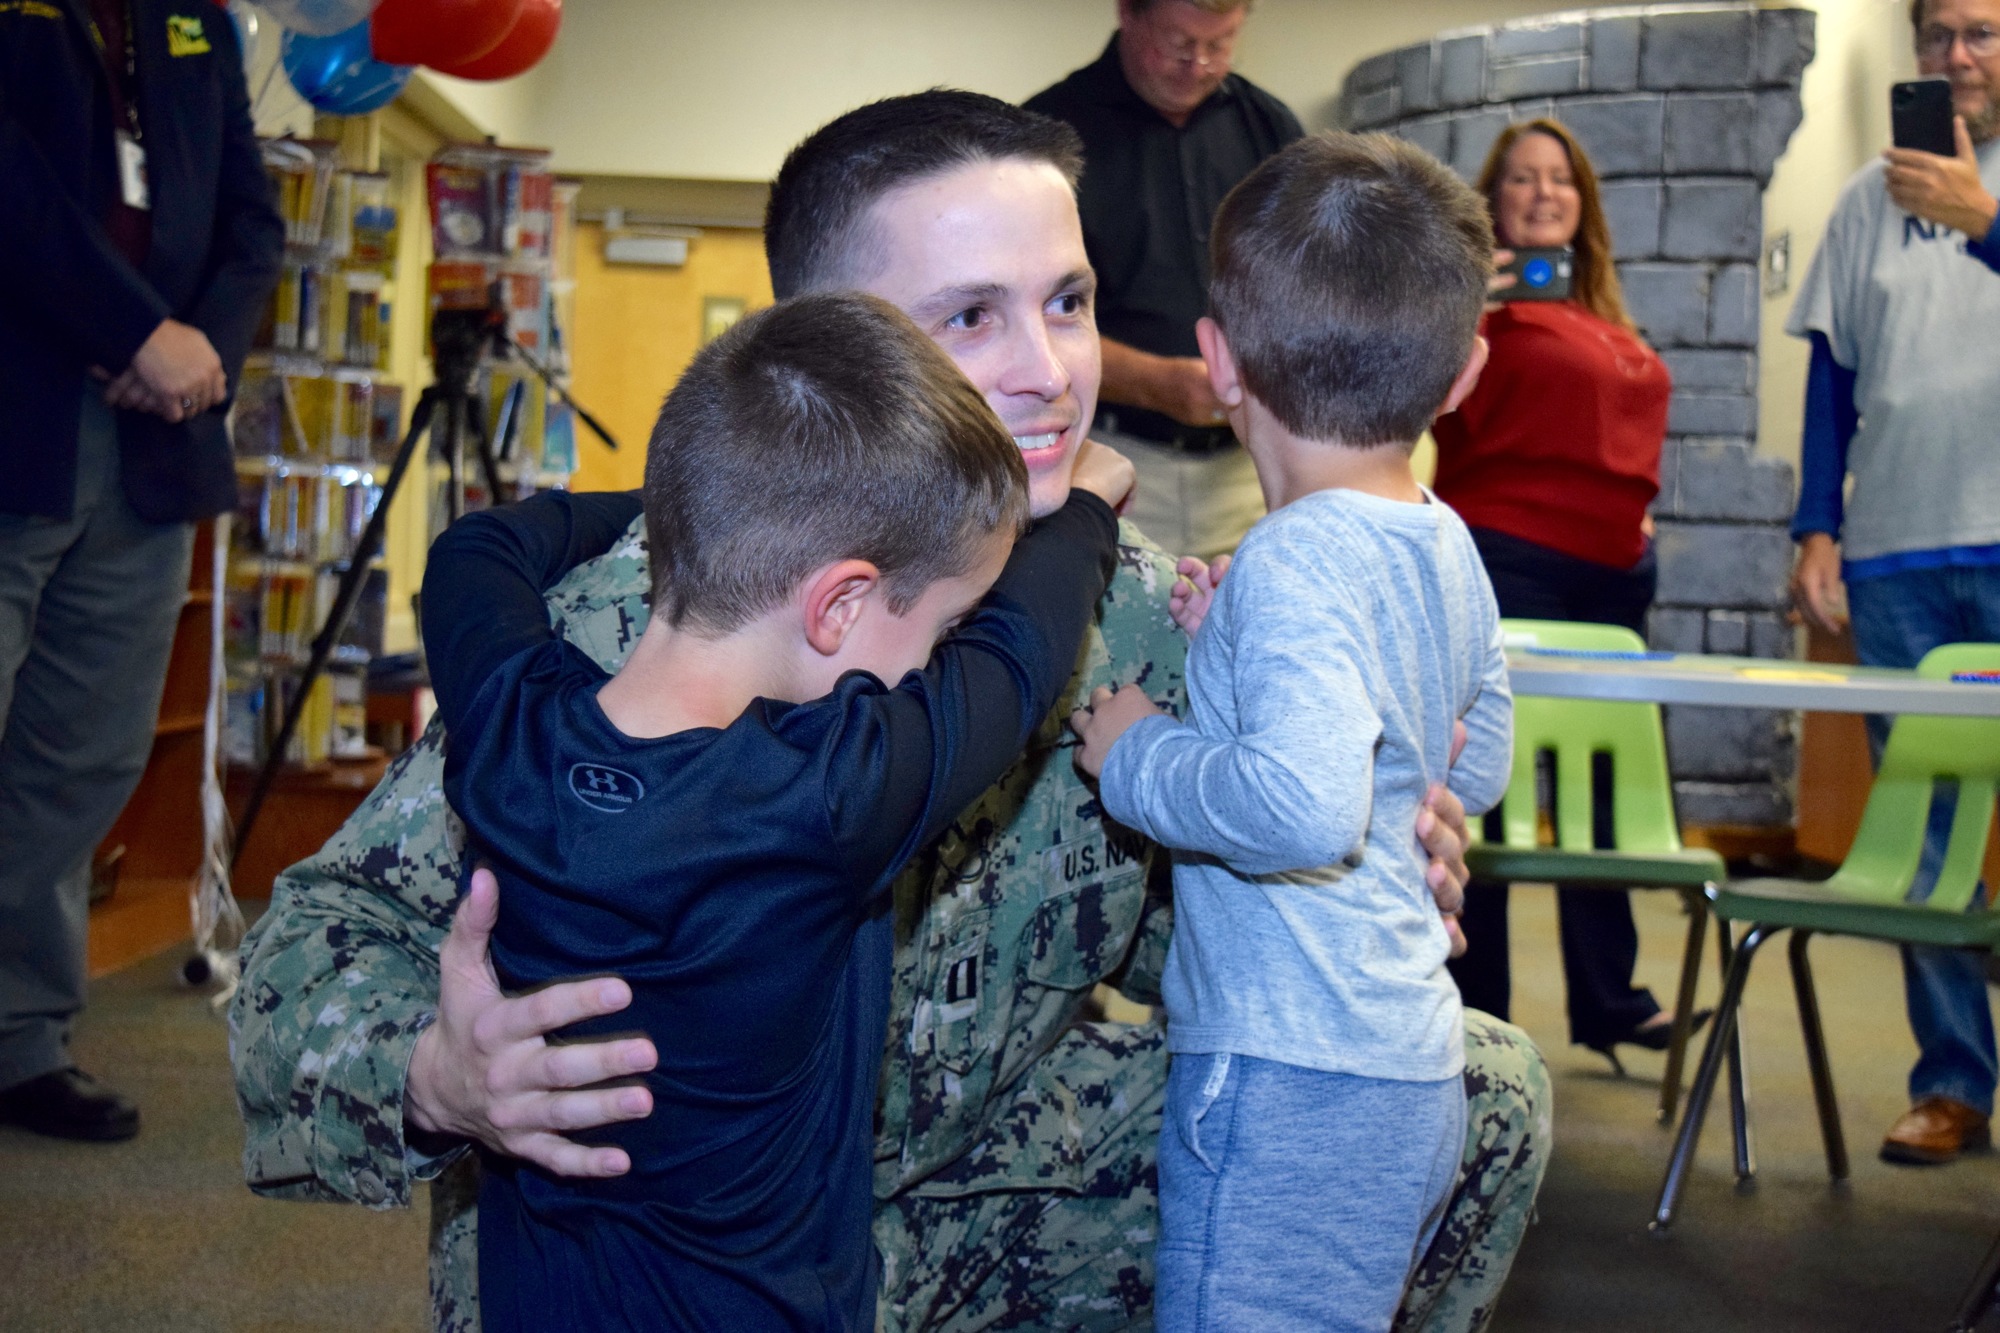 Lt. Steve Phillips’ sons, Jack and Chase, were thrilled to have him home again.